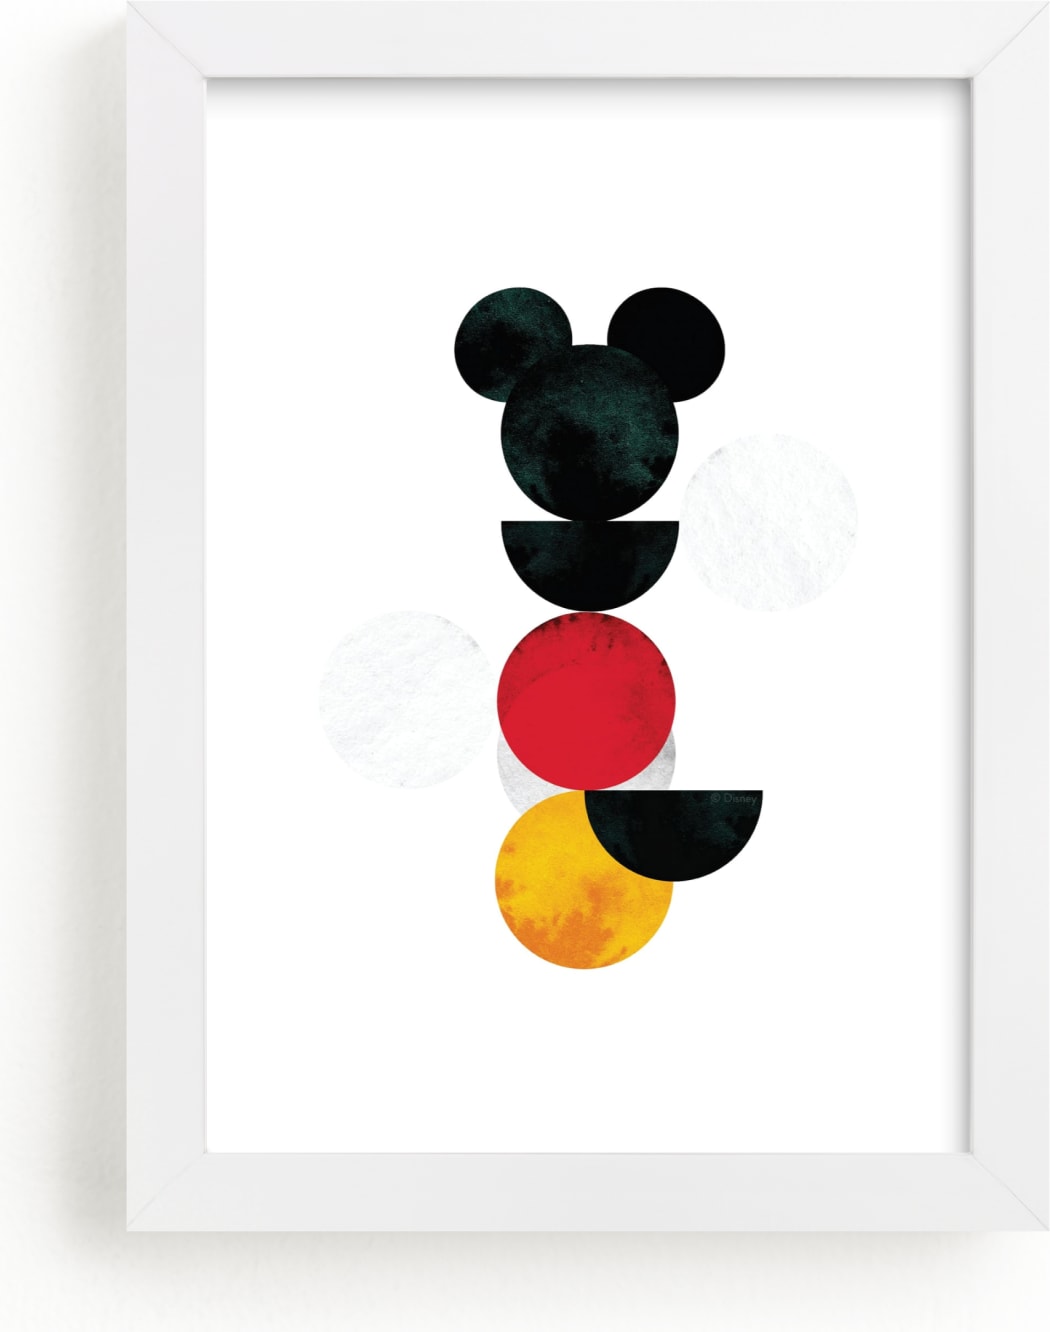 This is a yellow disney art by Anna Joseph called Minimalist.